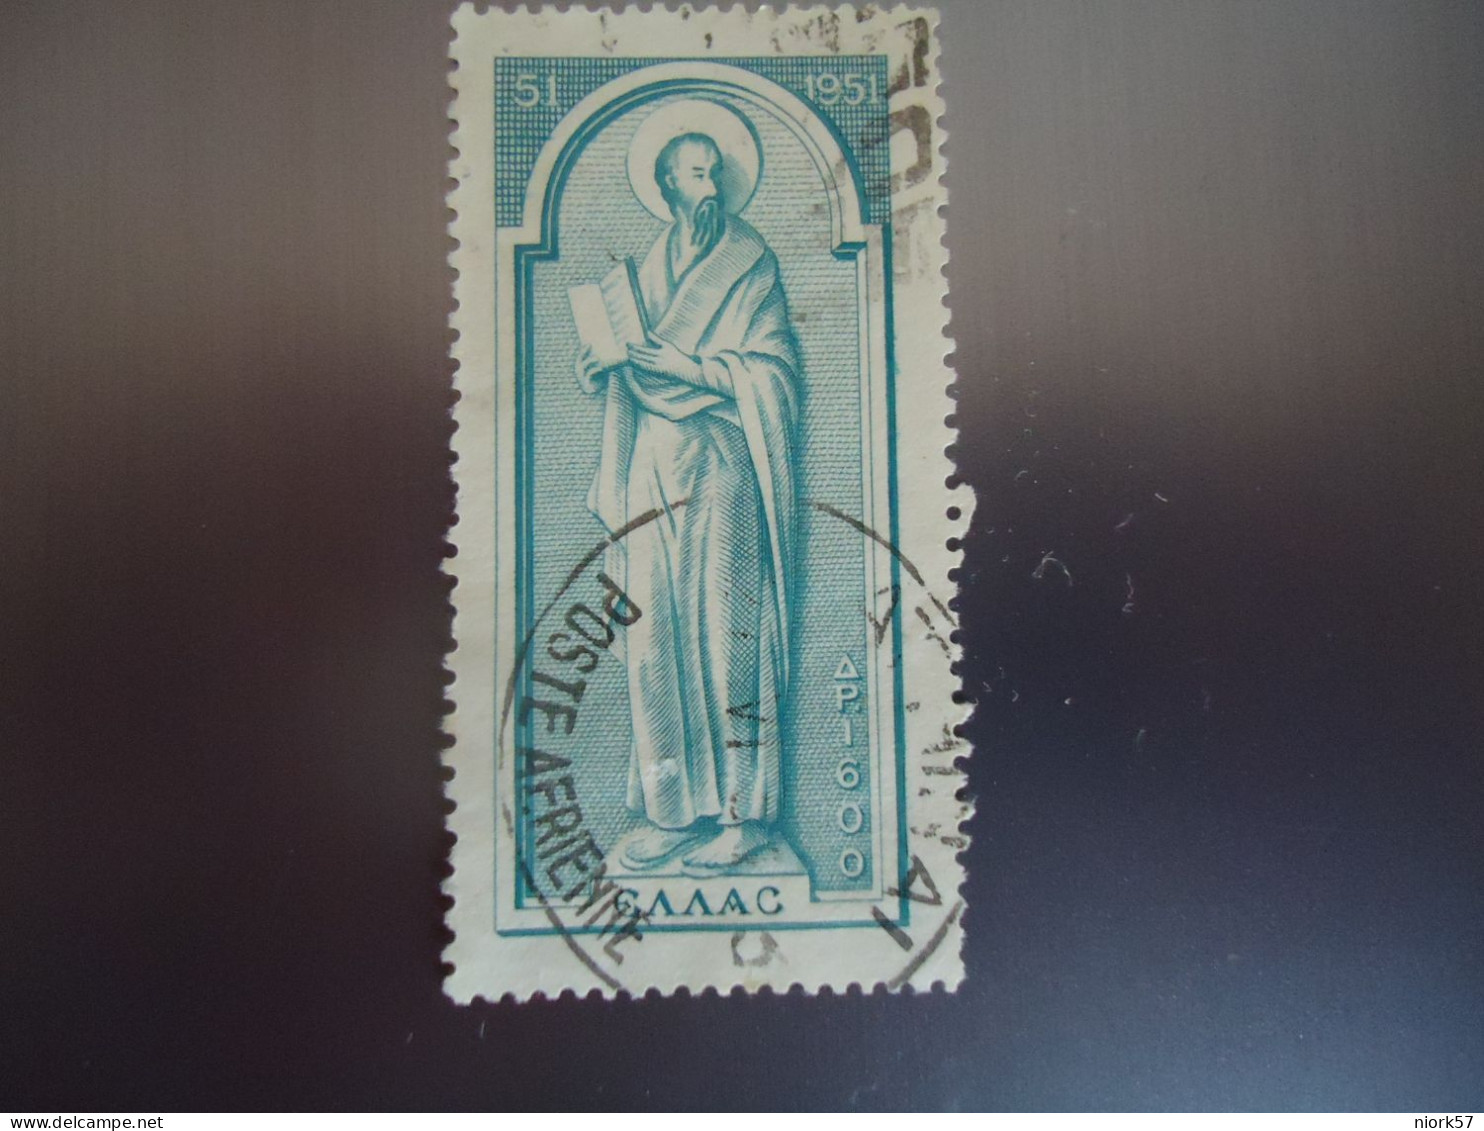 GREECE   USED STAMPS   POSTMARK  ΠΑΥΛΟΣ  ΑΘΗΝΑΙ POSTE AERIENNE 1951 - Usados